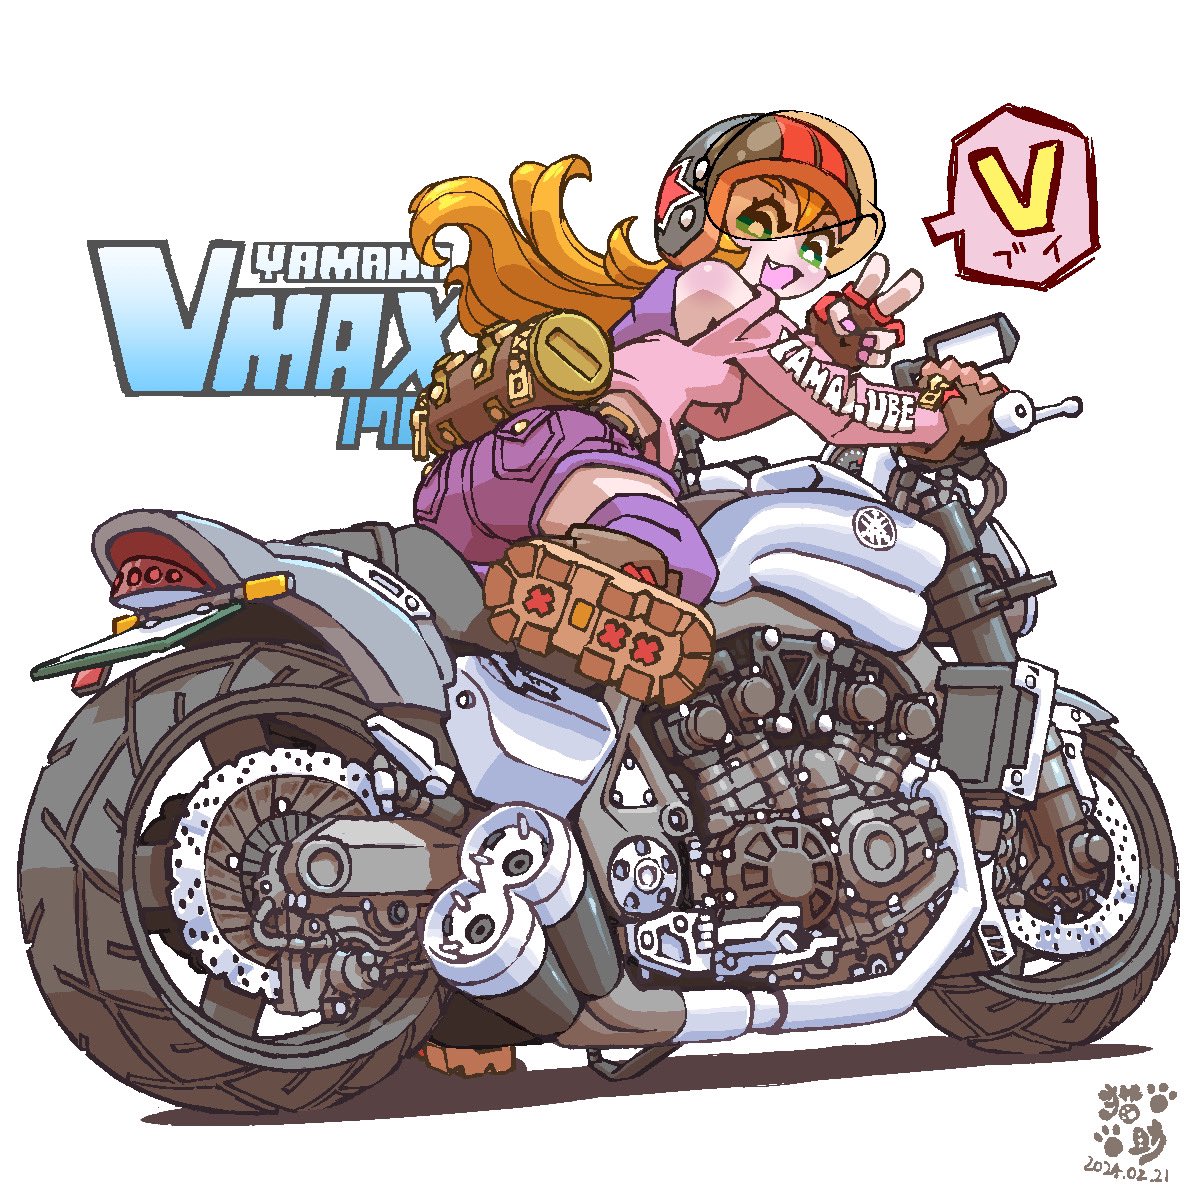 @jaycee3035 I have drawn in the past.
💁‍♀️
#bike #motorcycle #illustration #vmax